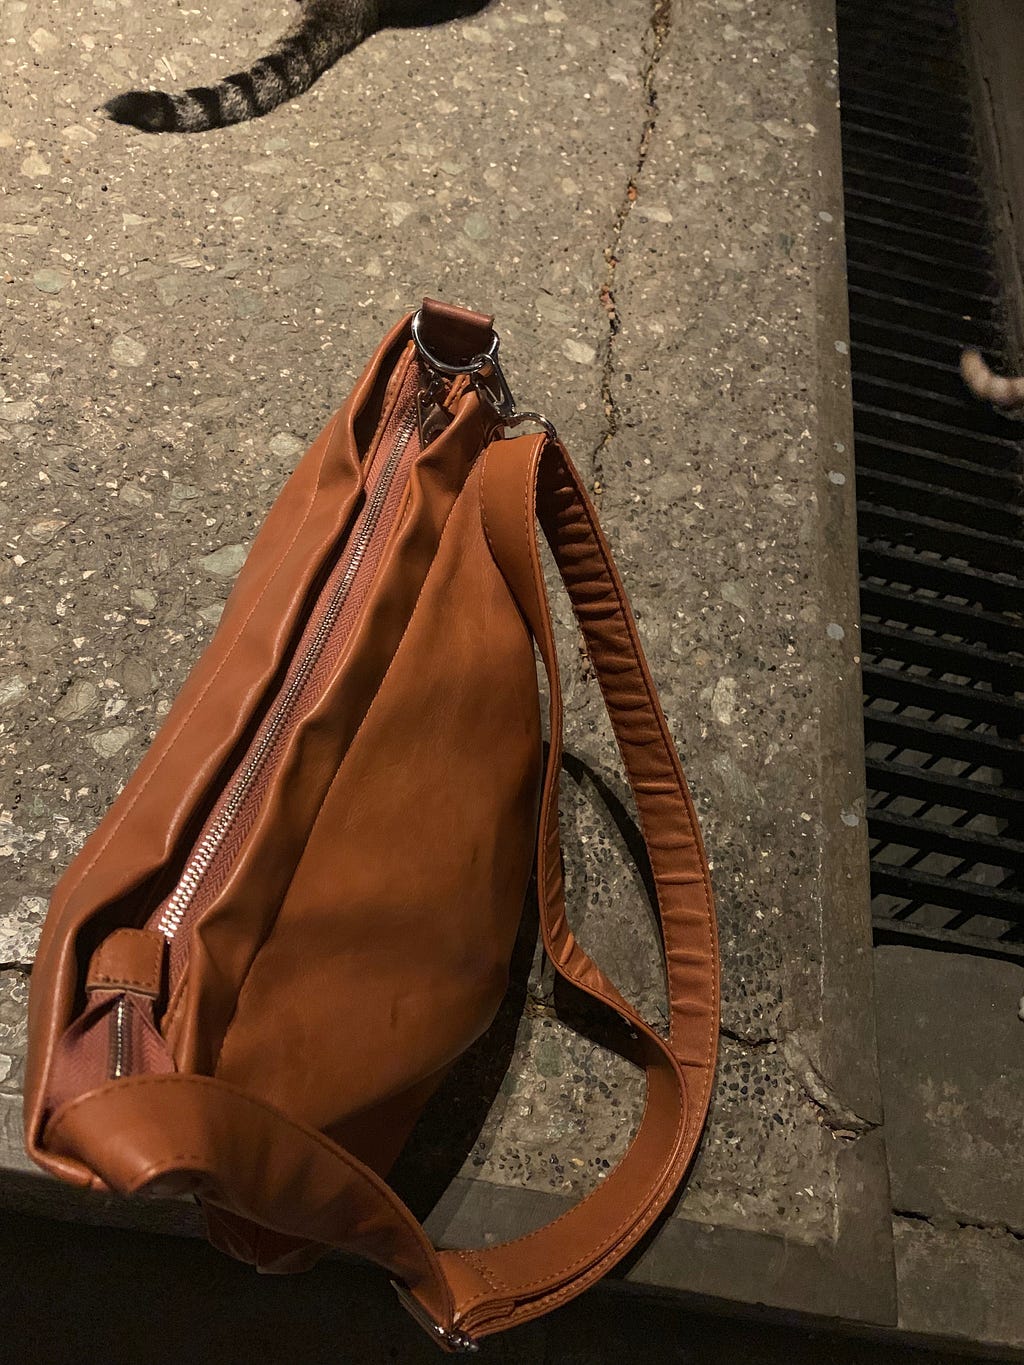 Photo of a bag, from iPhone XS